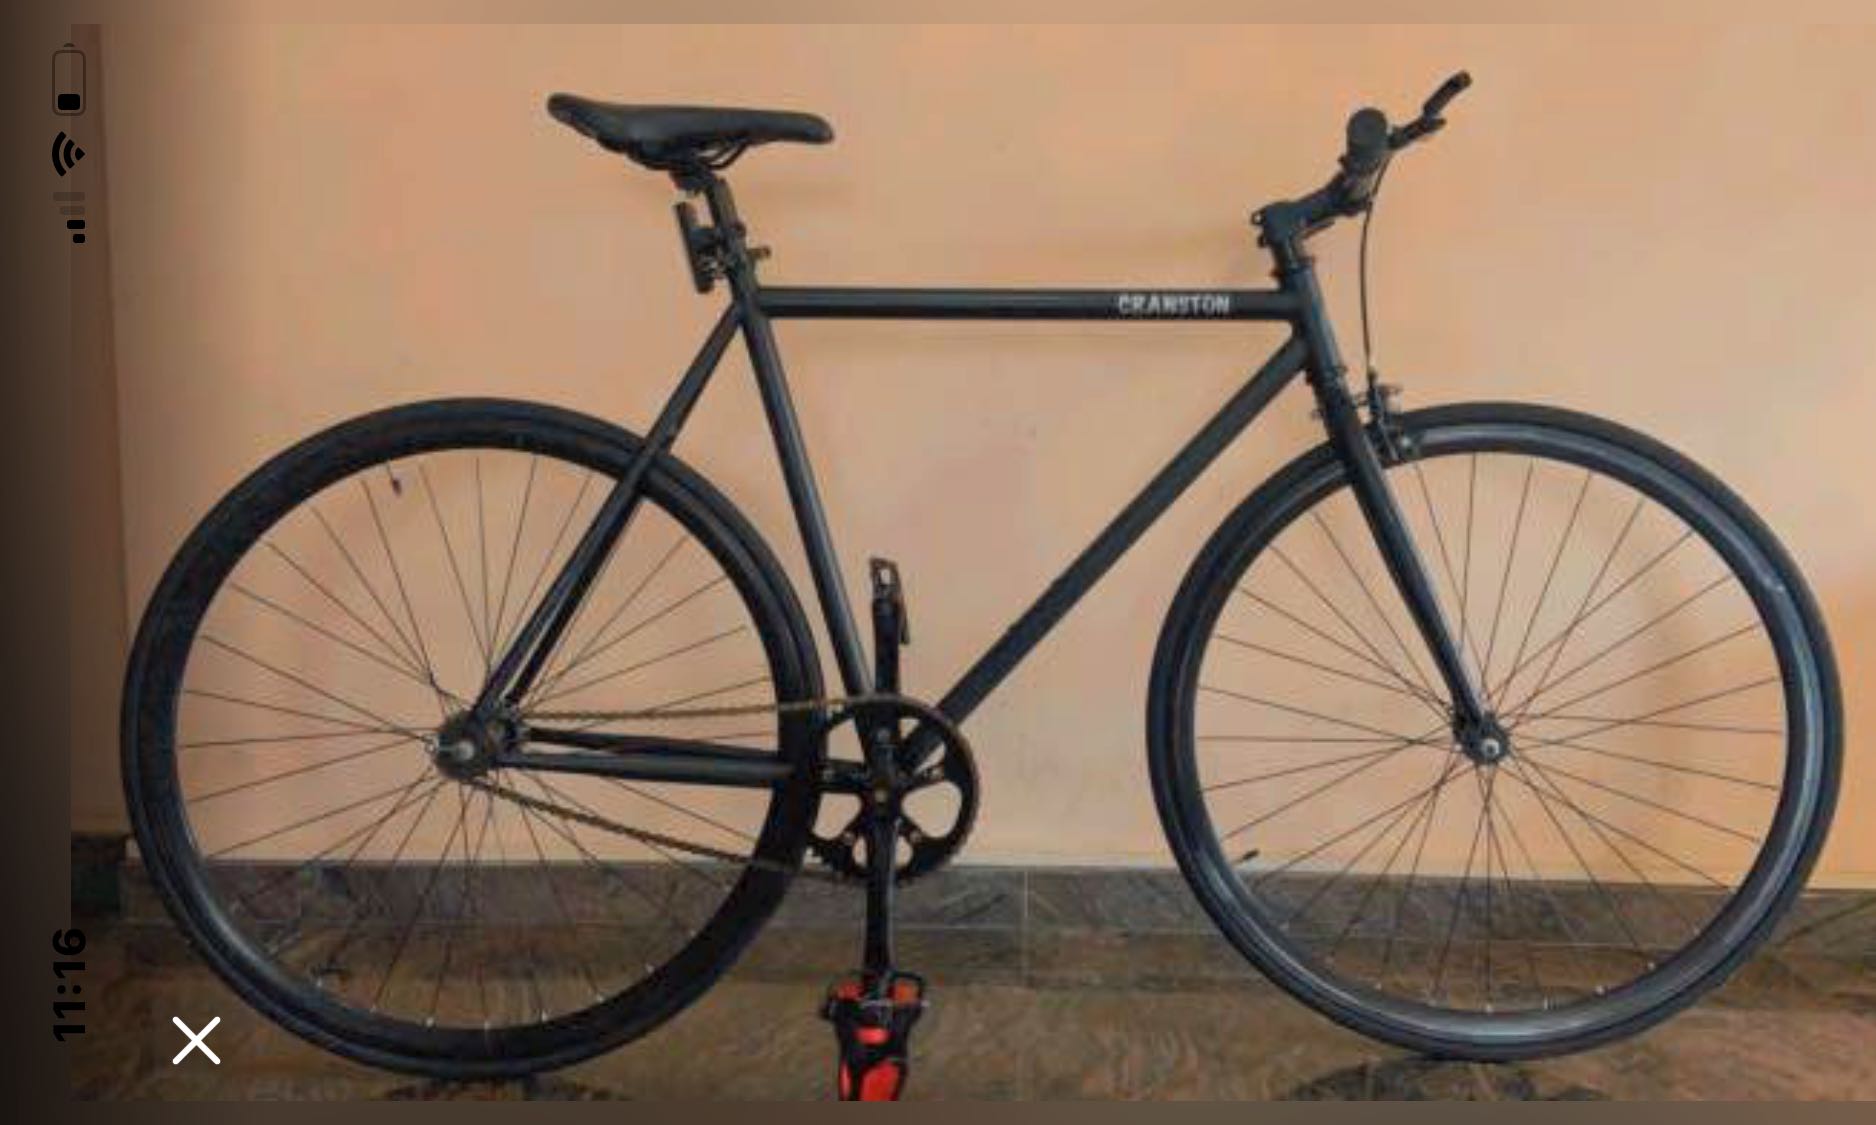 Cranston Fixie, Sports Equipment, Bicycles & Parts, Bicycles on Carousell